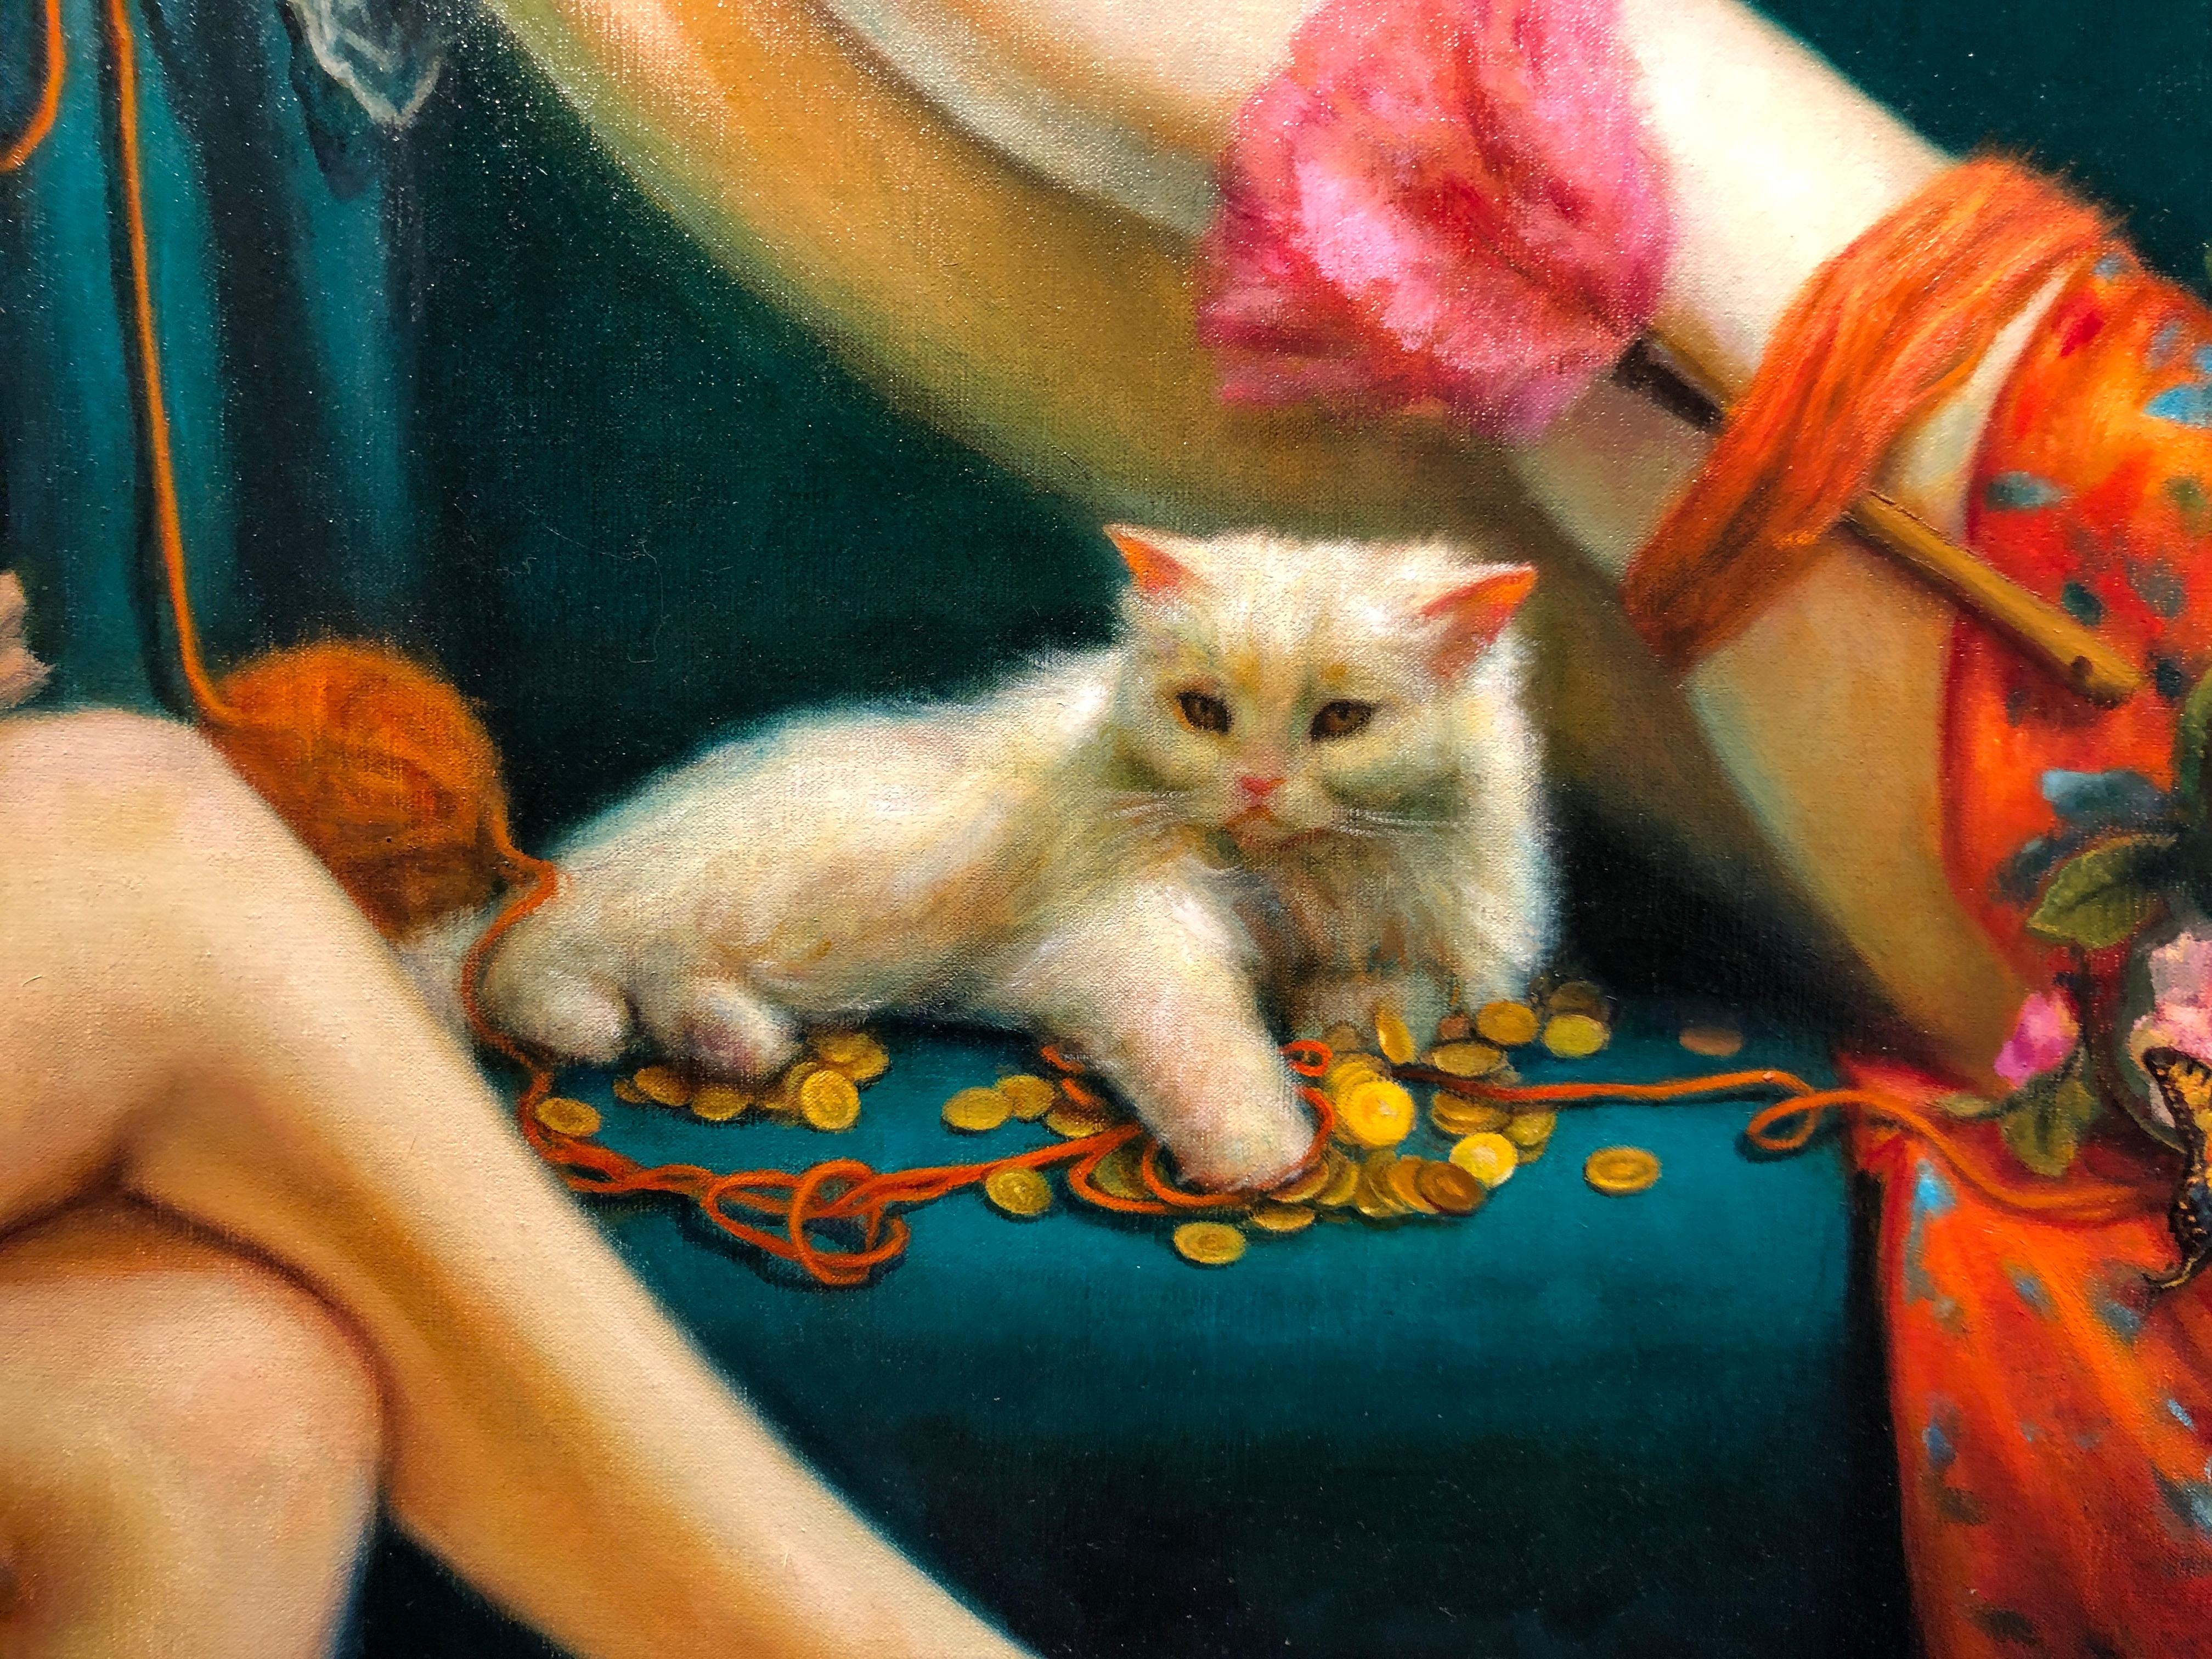 Self-Made,  Woman Lounging on Teal Couch with Persian Cat, Original Oil Painting 3